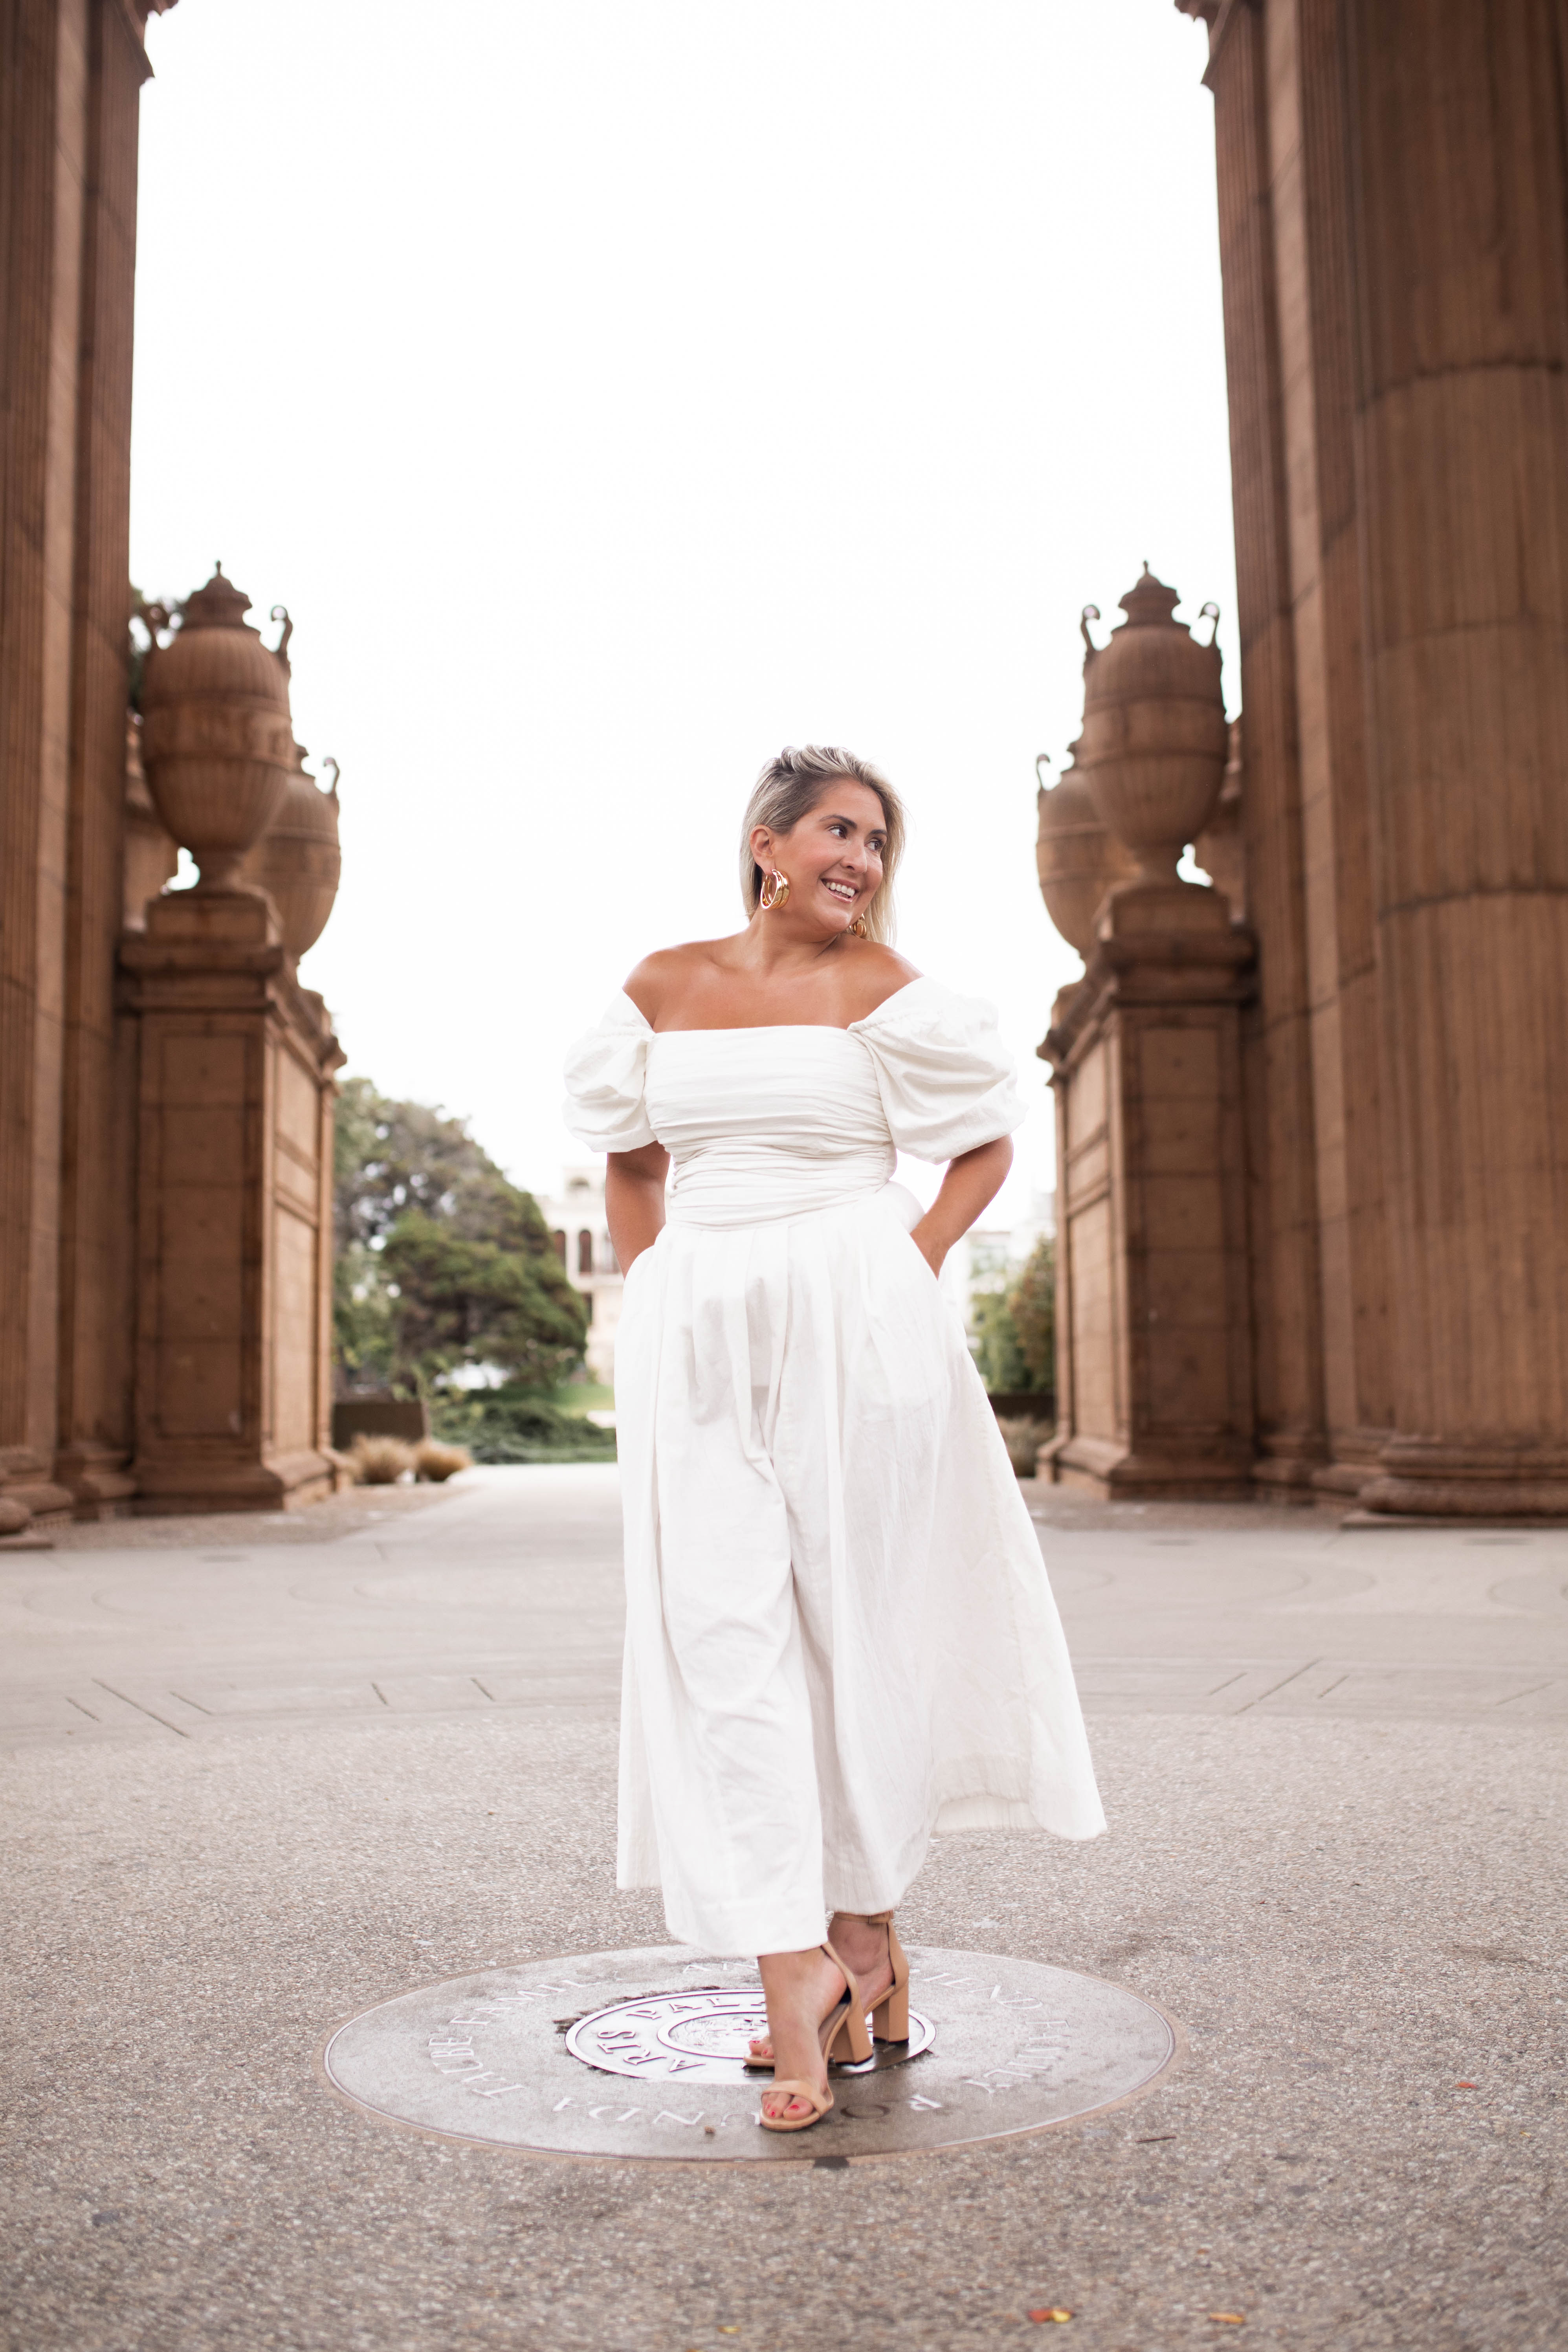 KatWalkSF wearing the Free People Ruched Dress at the Palace of Fine Arts.